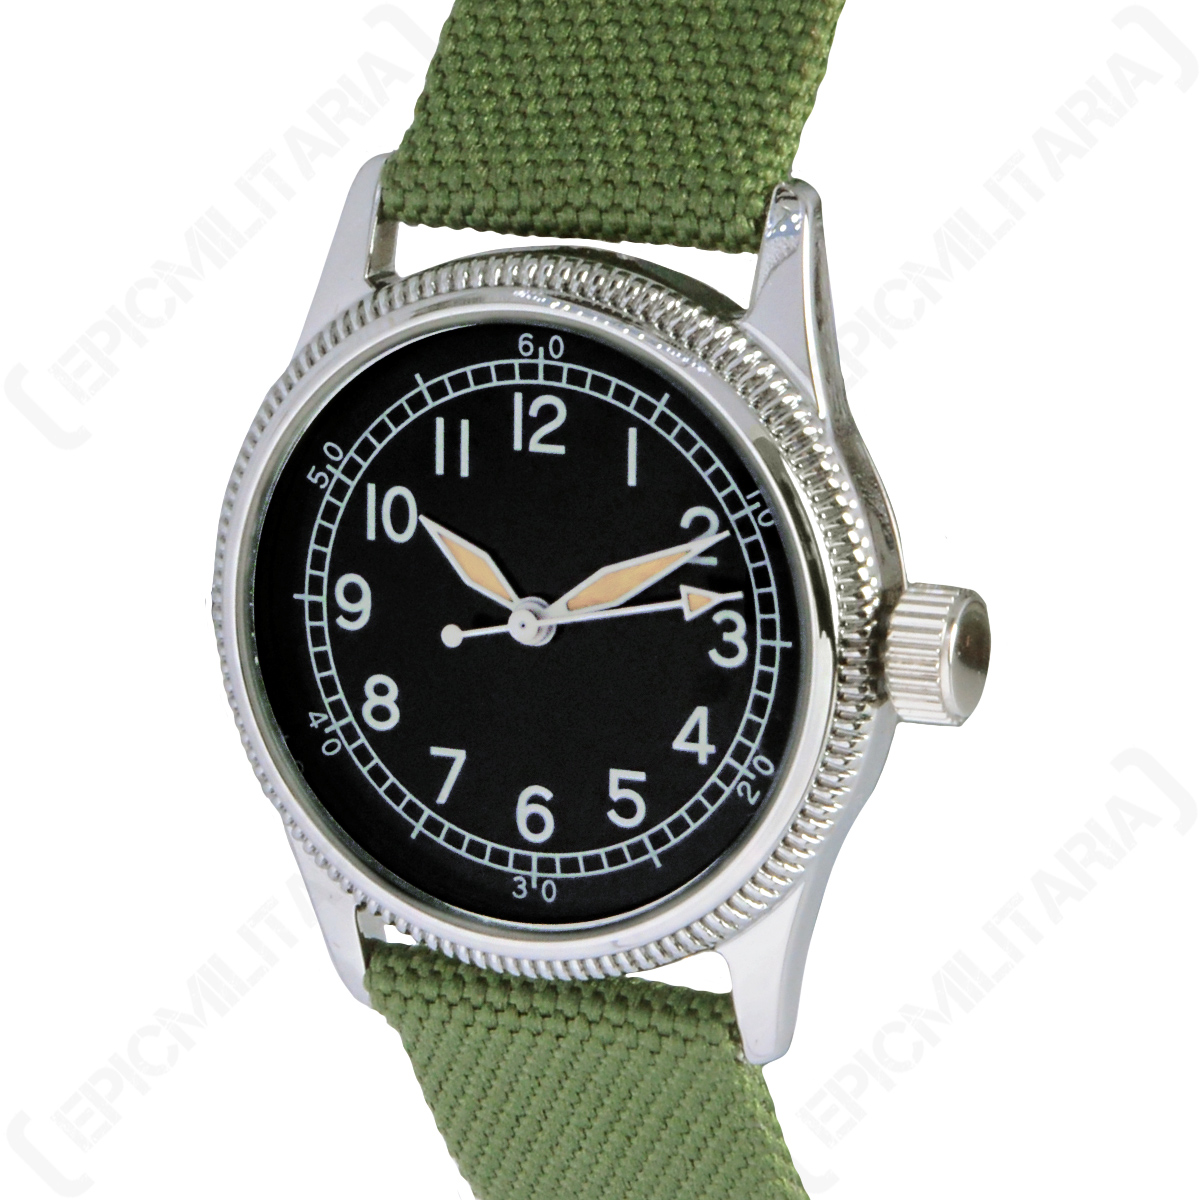 THORN A11 Retro Military Watch Titanium NH35 Movement Automatic Sapphire  Crystal 200M Waterproof 36mm Men Homage